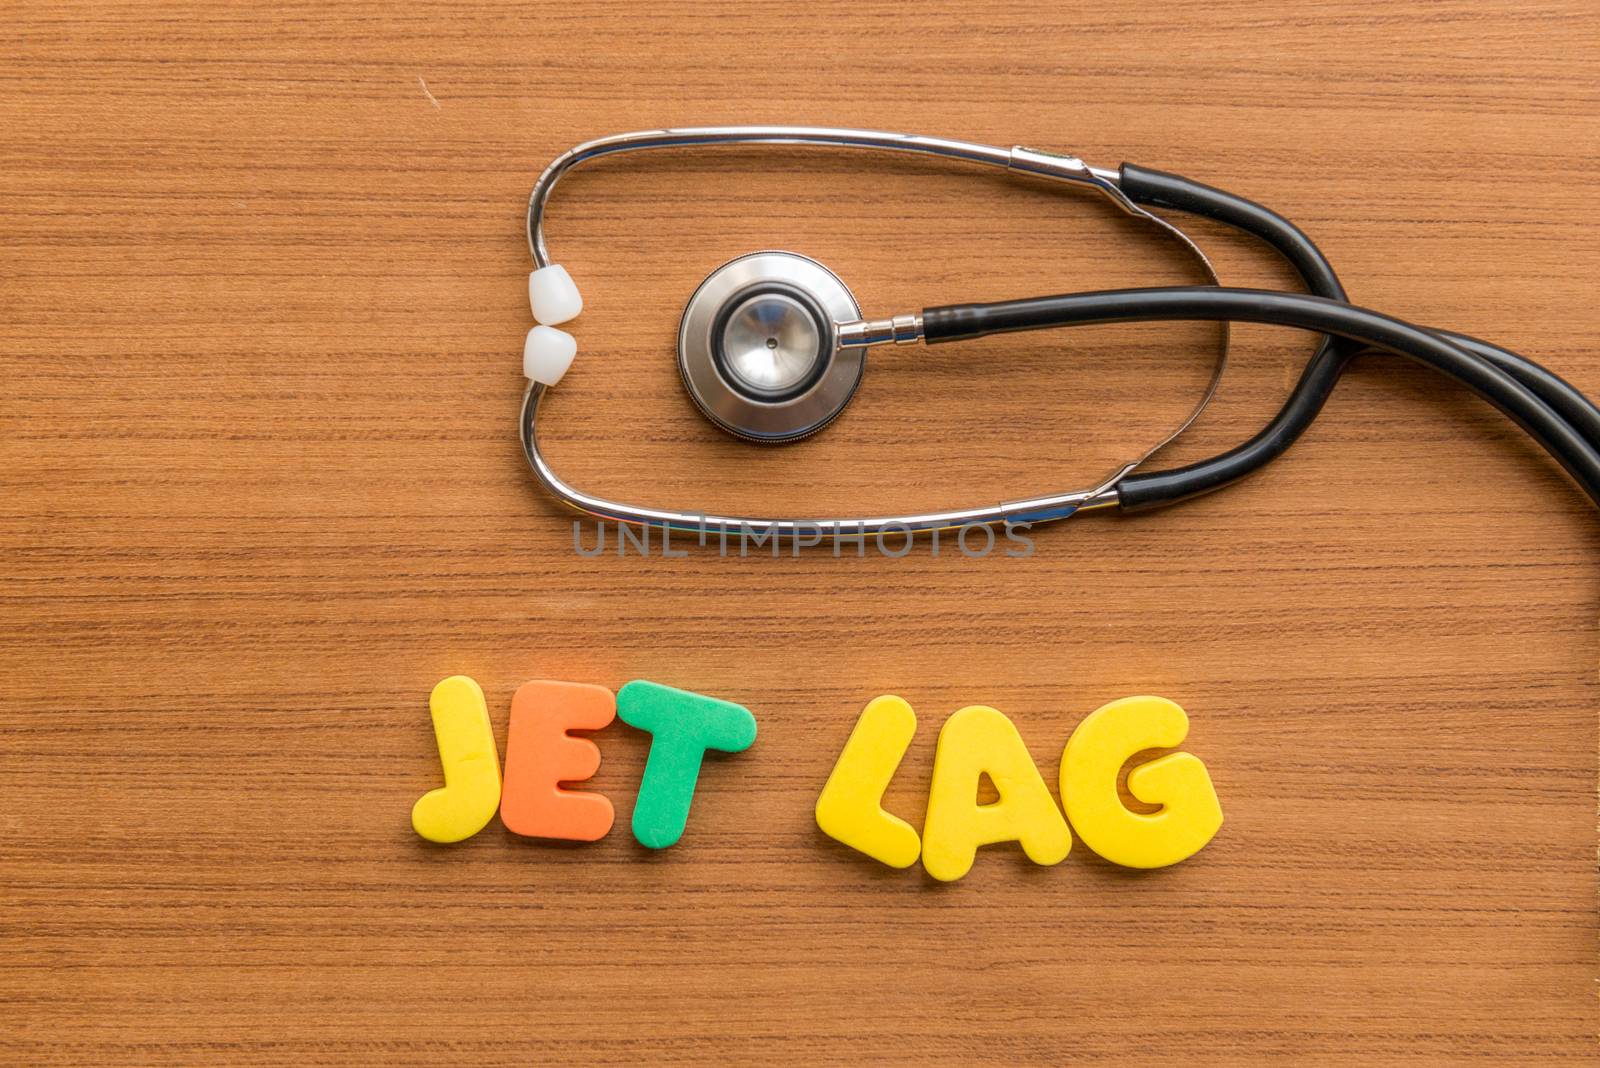 jet lag colorful word with Stethoscope on wooden background